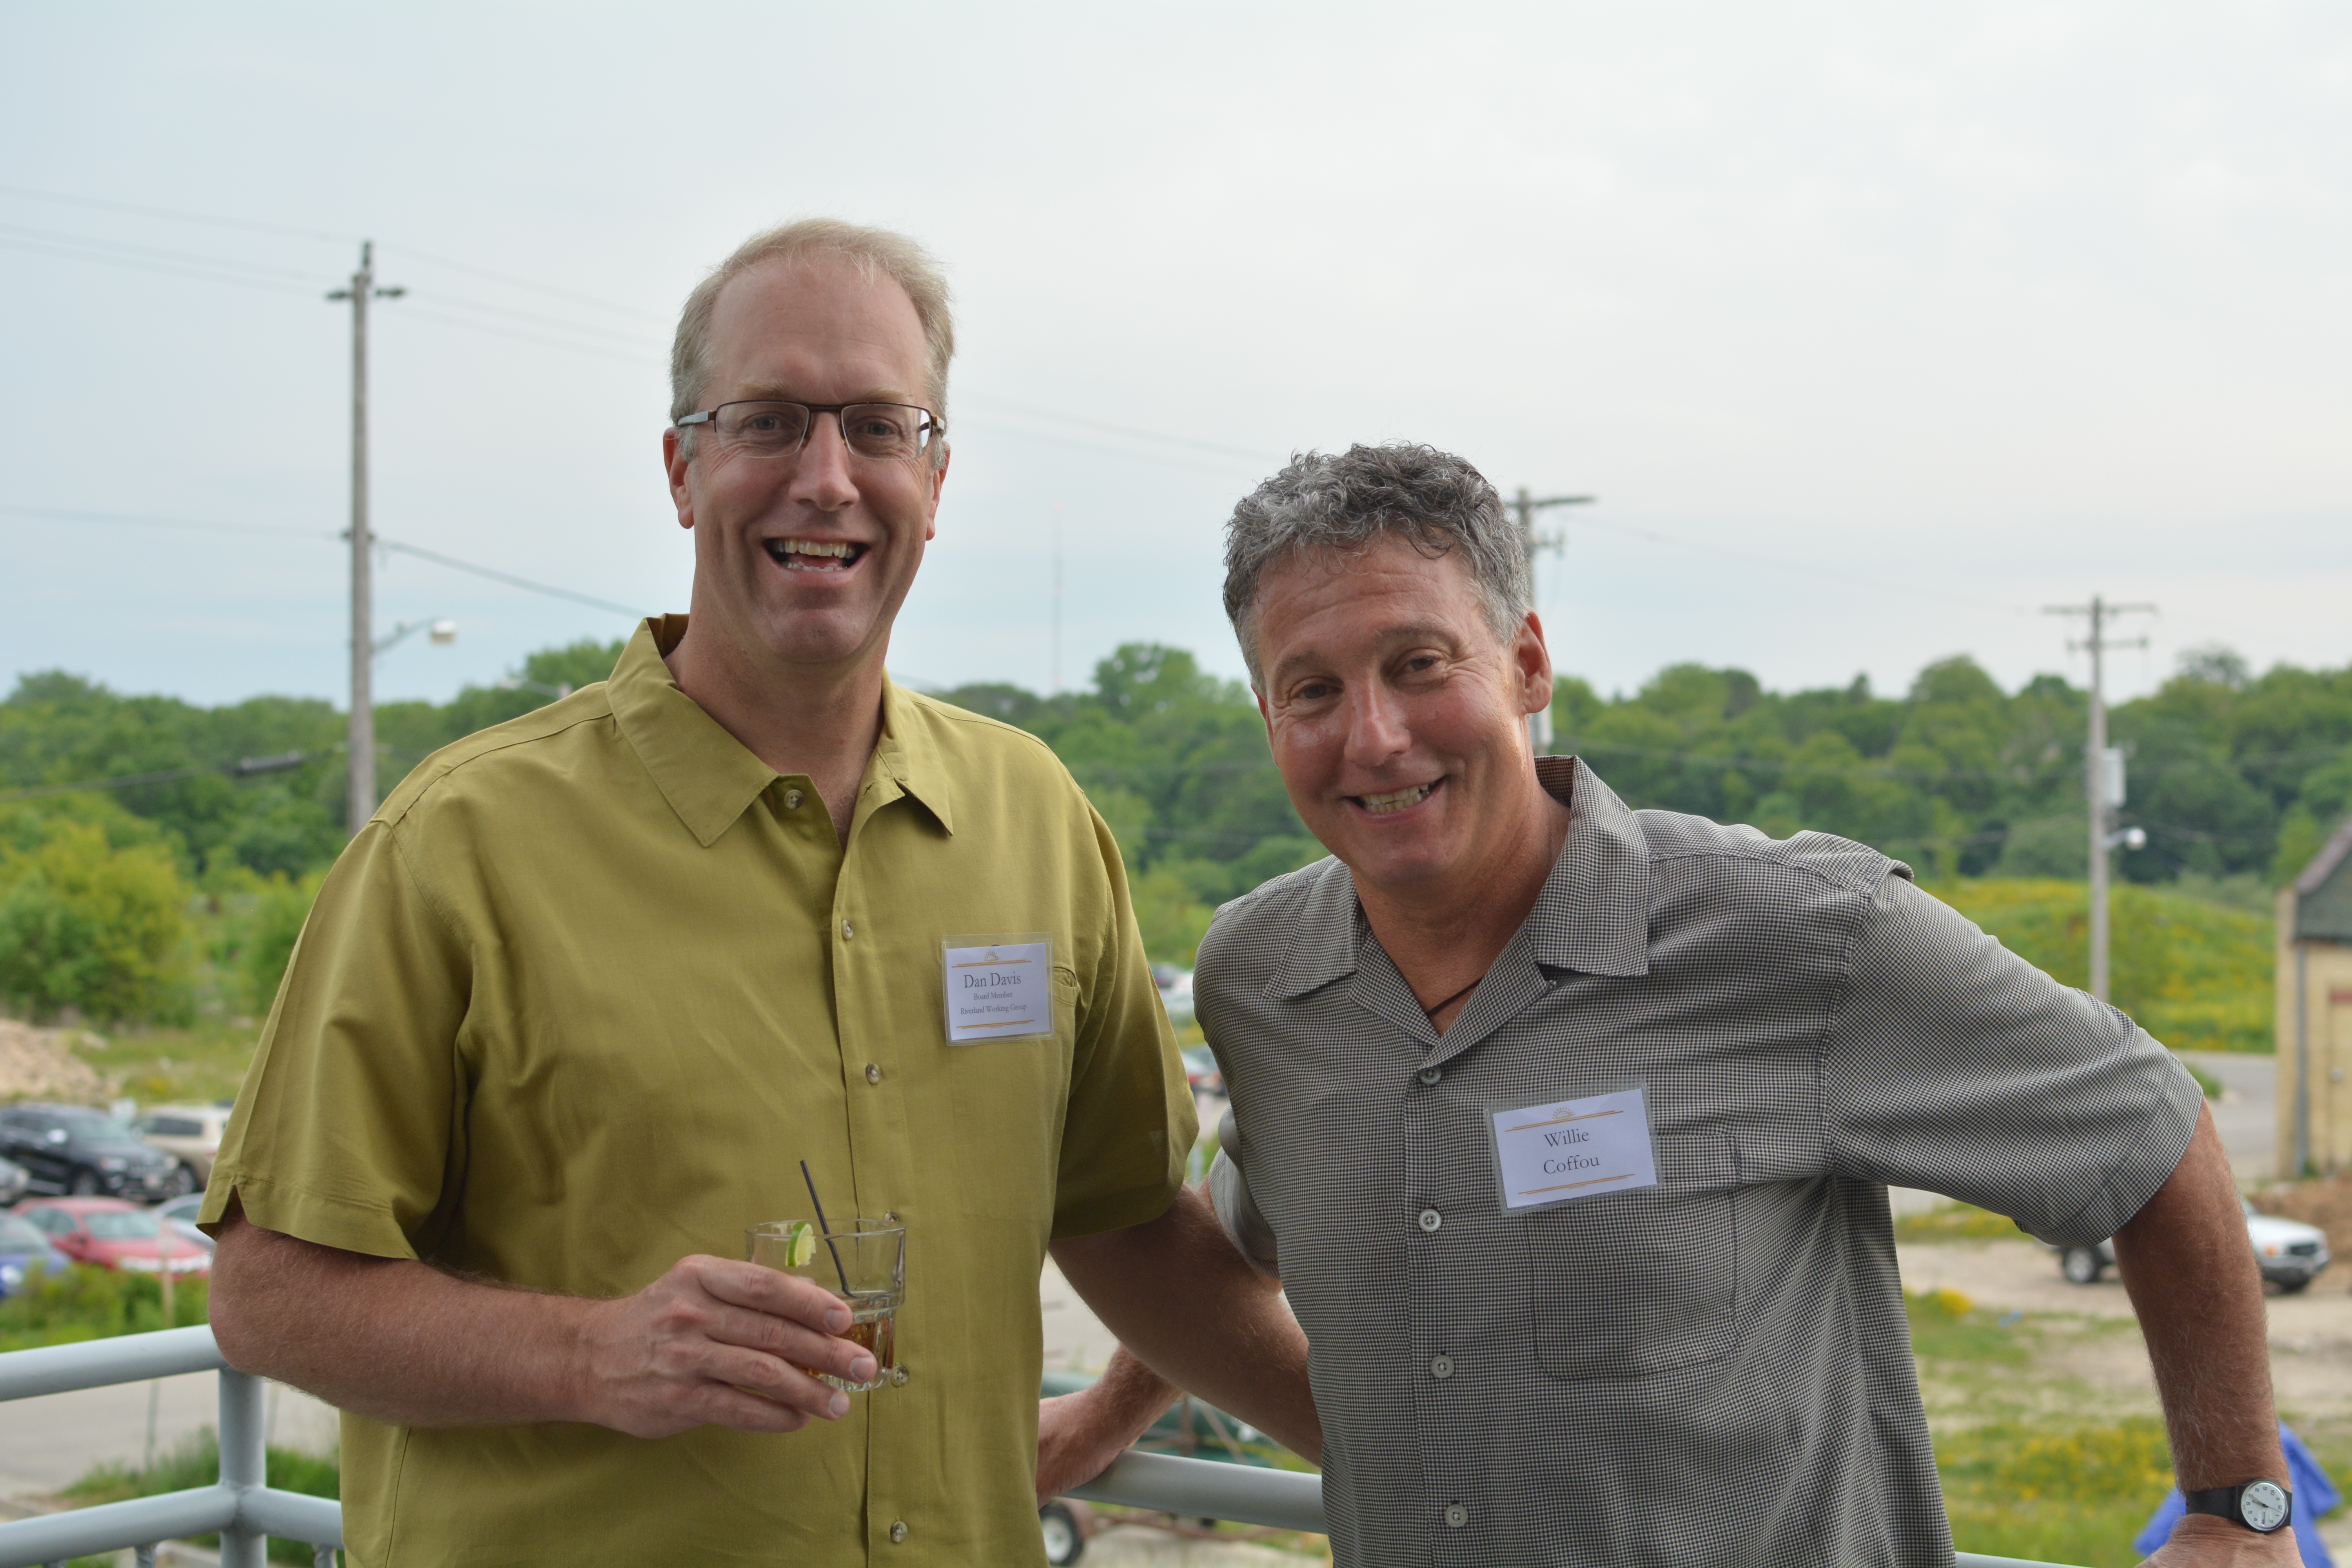 Supporters of the Urban Ecology Center